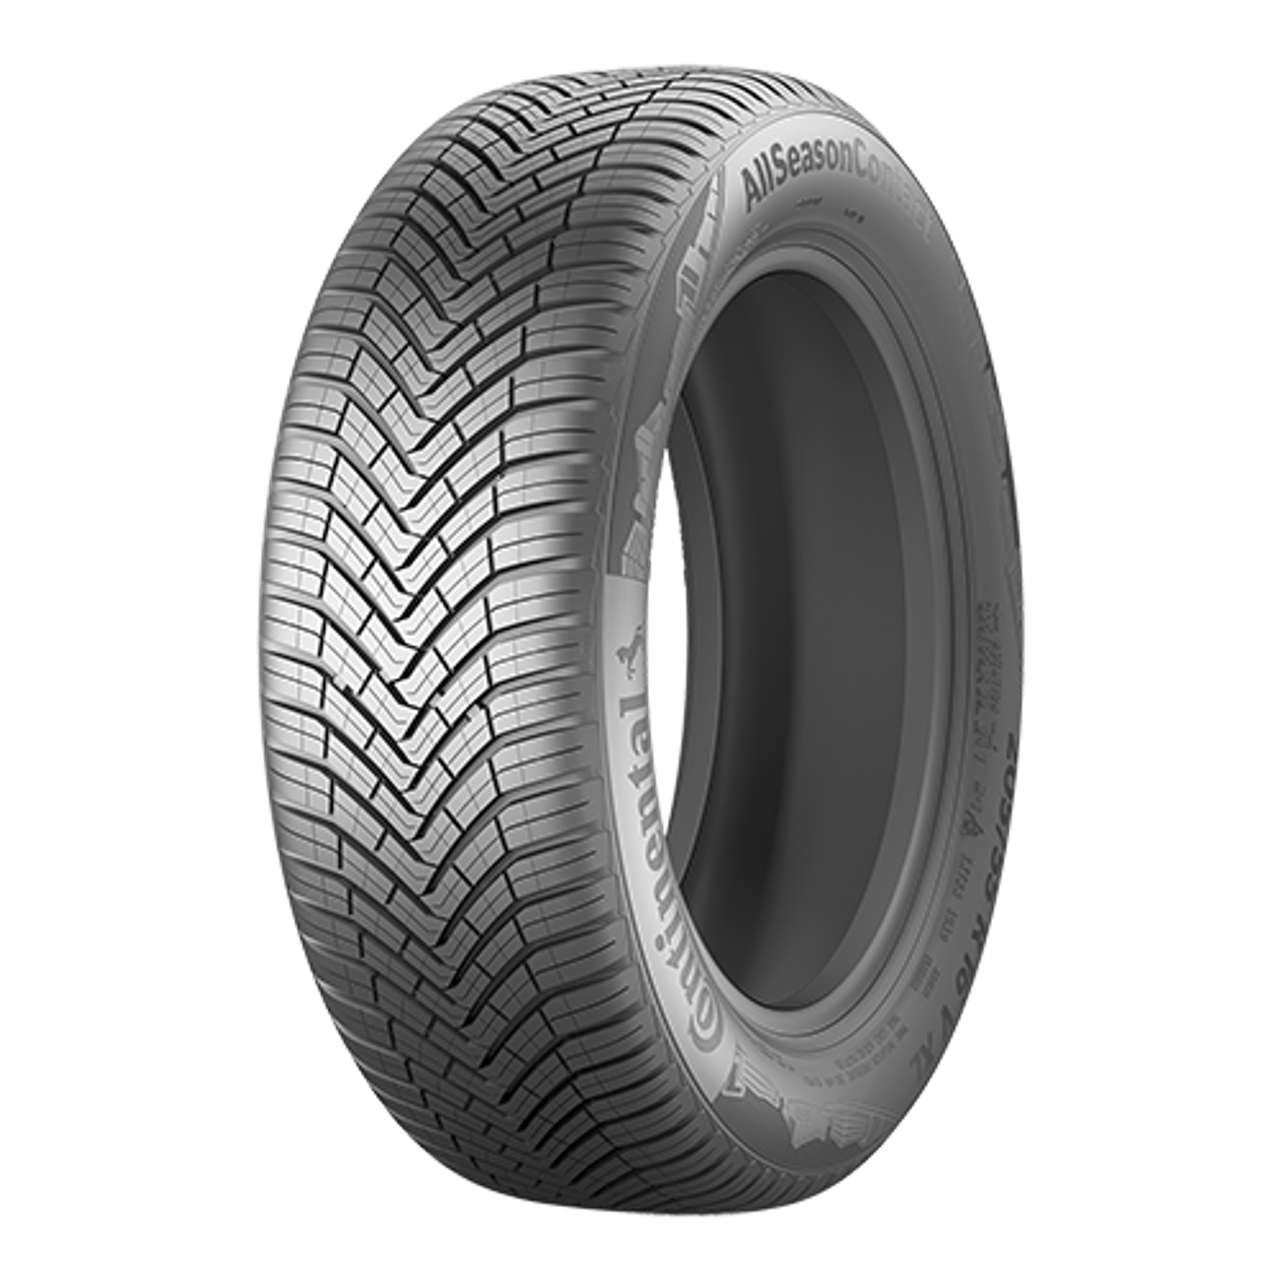 CONTINENTAL ALLSEASONCONTACT (EVc) 235/55R19 105H FR BSW